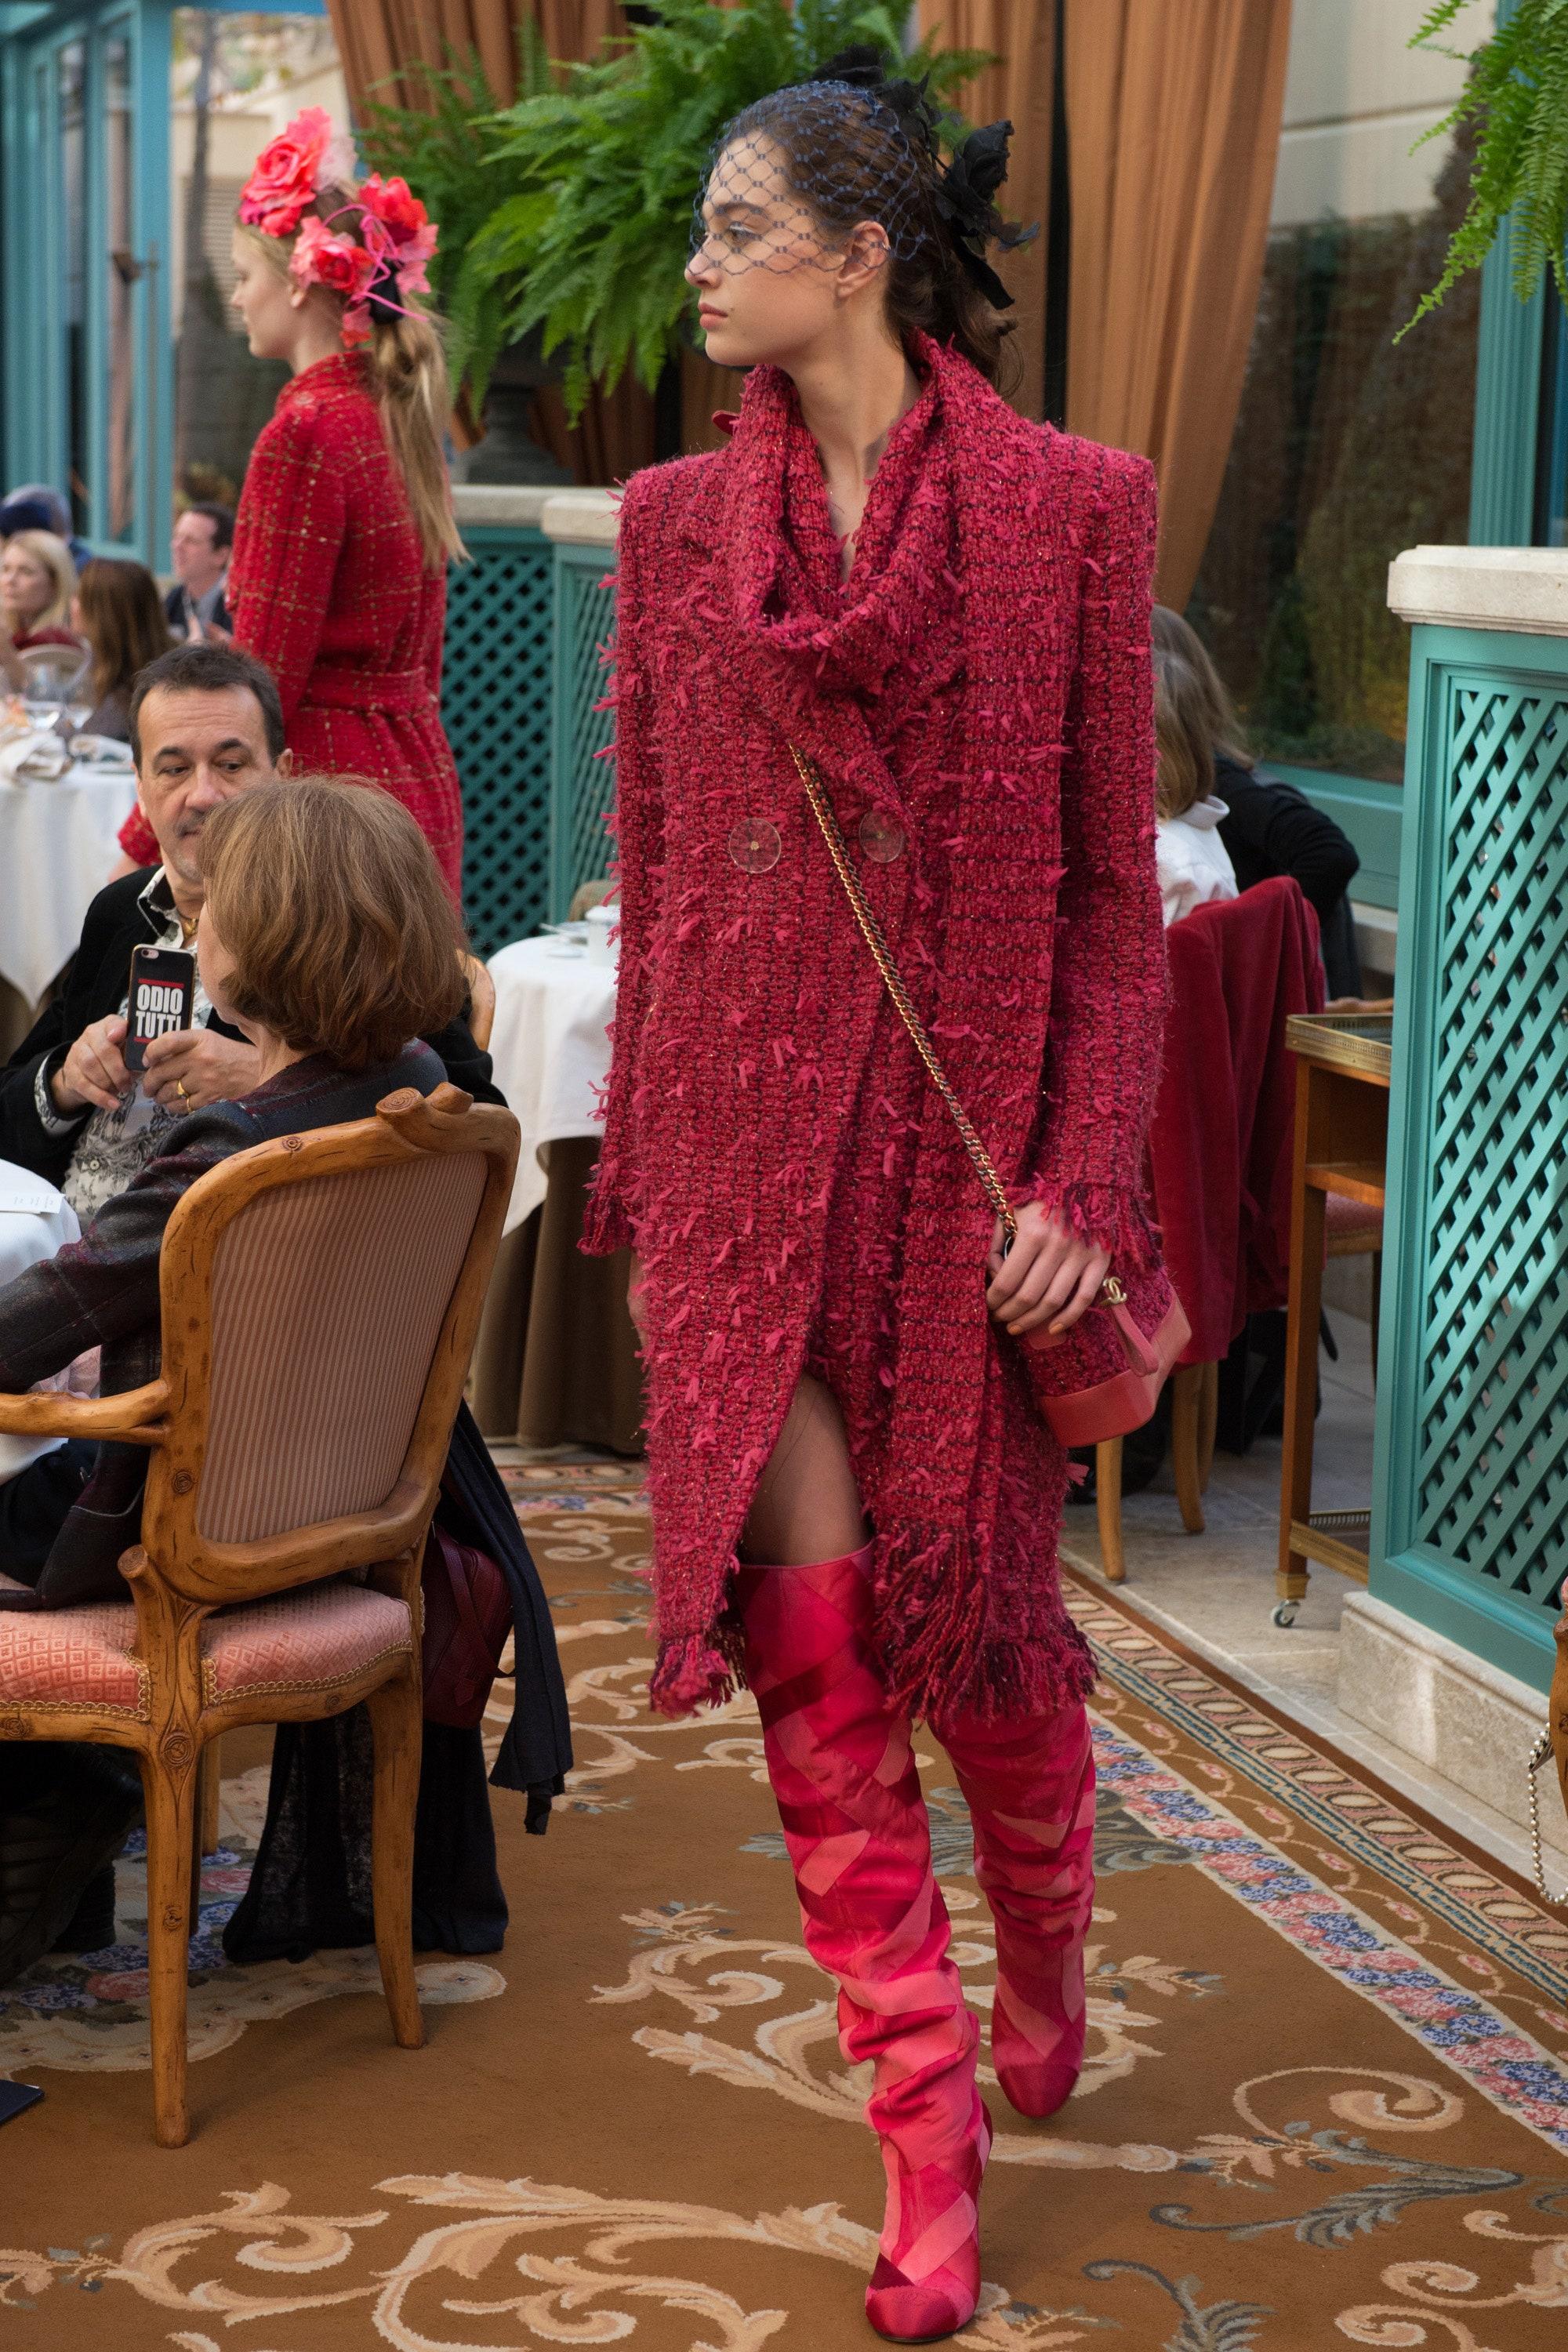 Stunning Chanel raspberry ribbon tweed jacket from Runway of Metier d'Art Paris / Cosmopolite  Collection, 2017 Pre-Fall, 17A
- super beautiful berry color shade - not bright but very pleasant to eye!
- double rows of CC logo lucite buttons 
- tonal